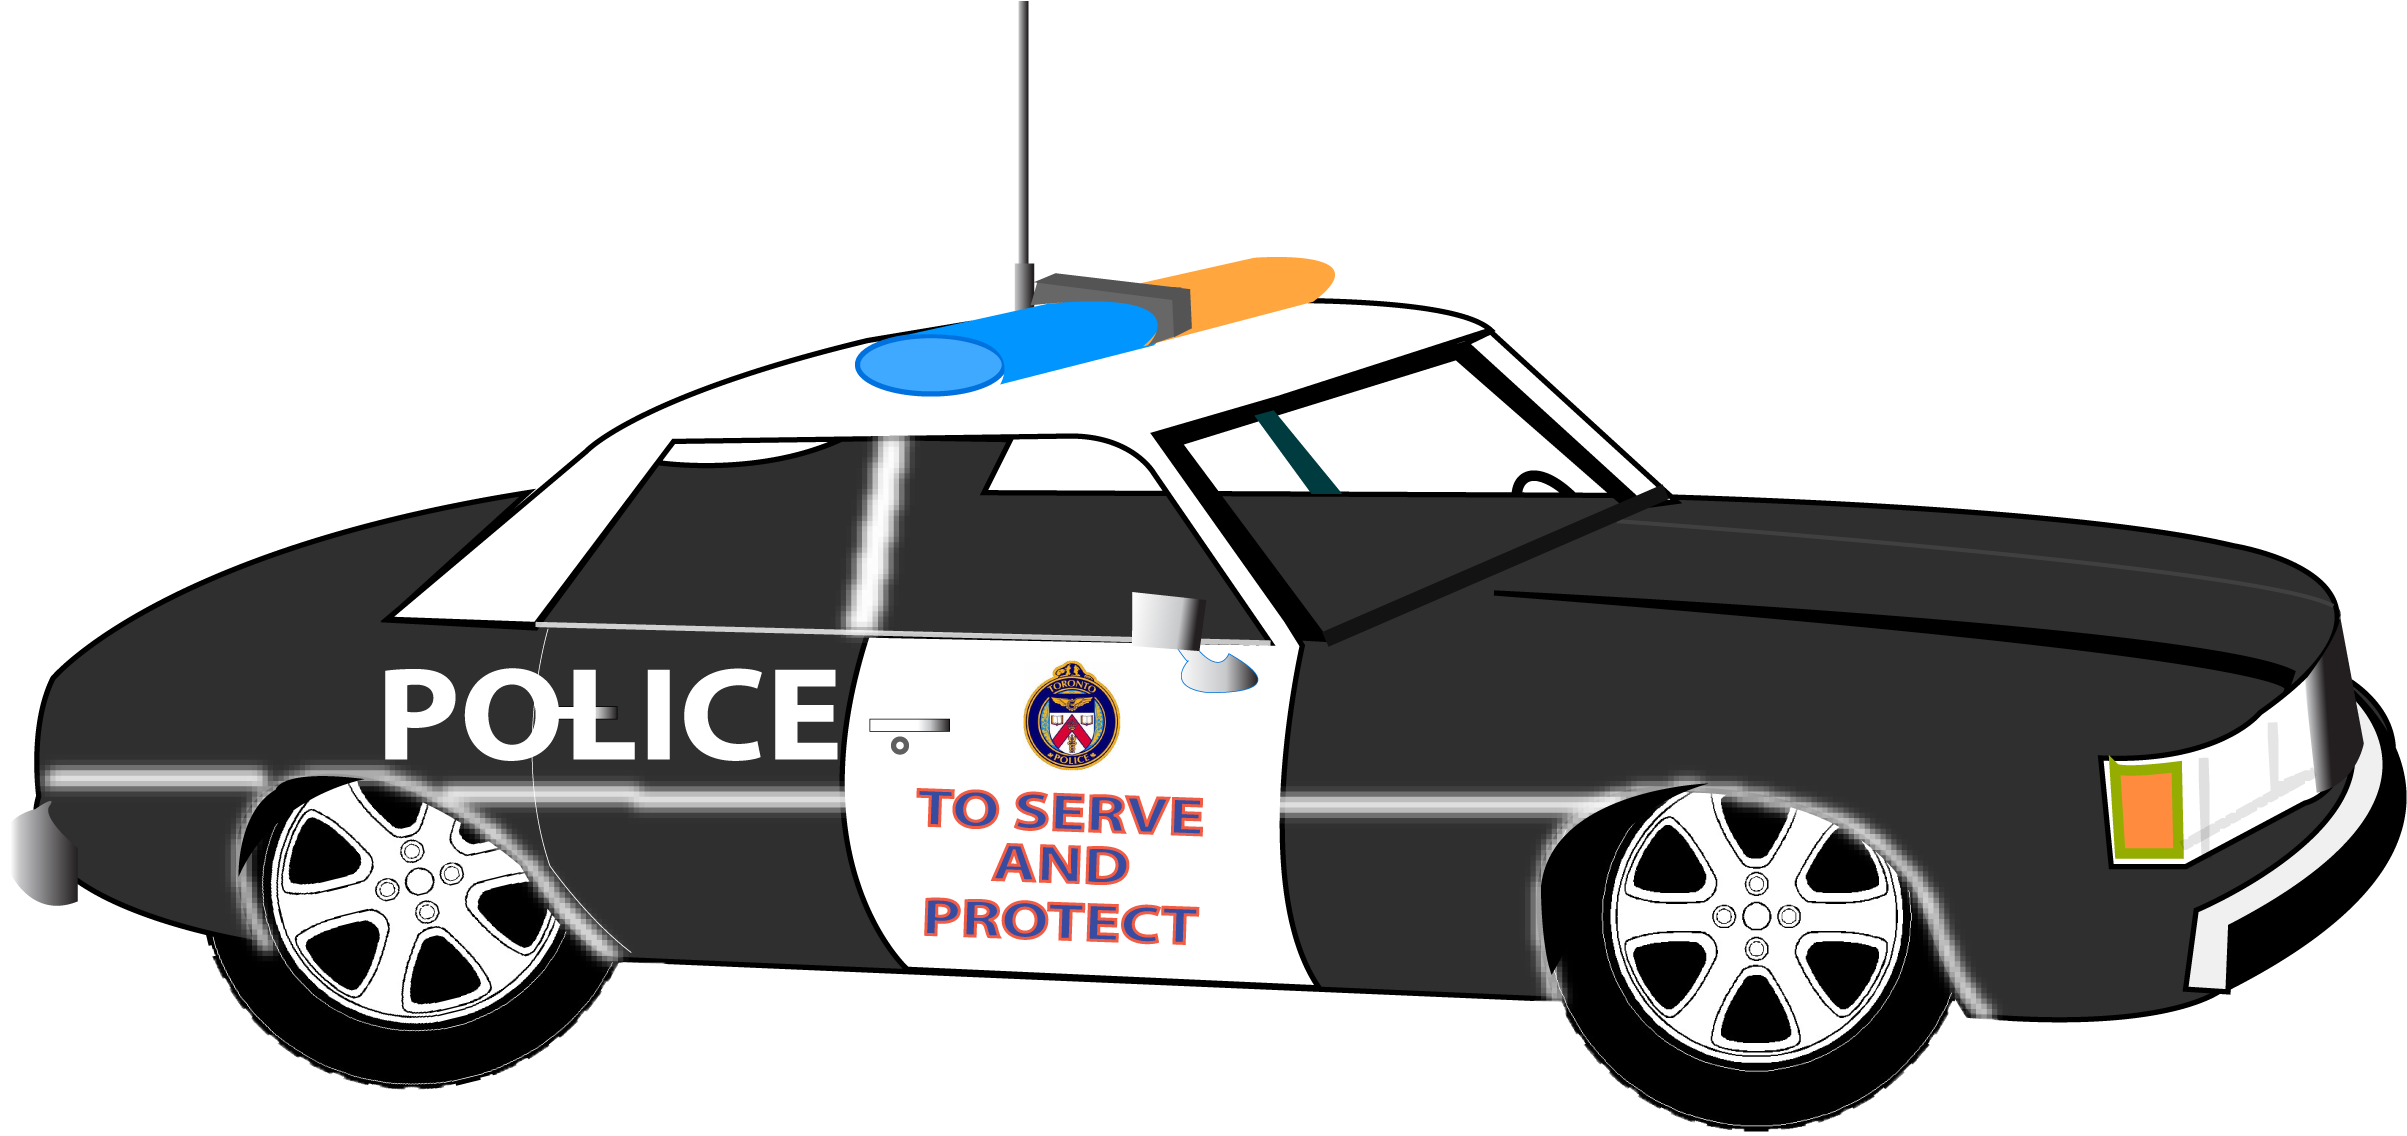 A Police Car With A Light On Top